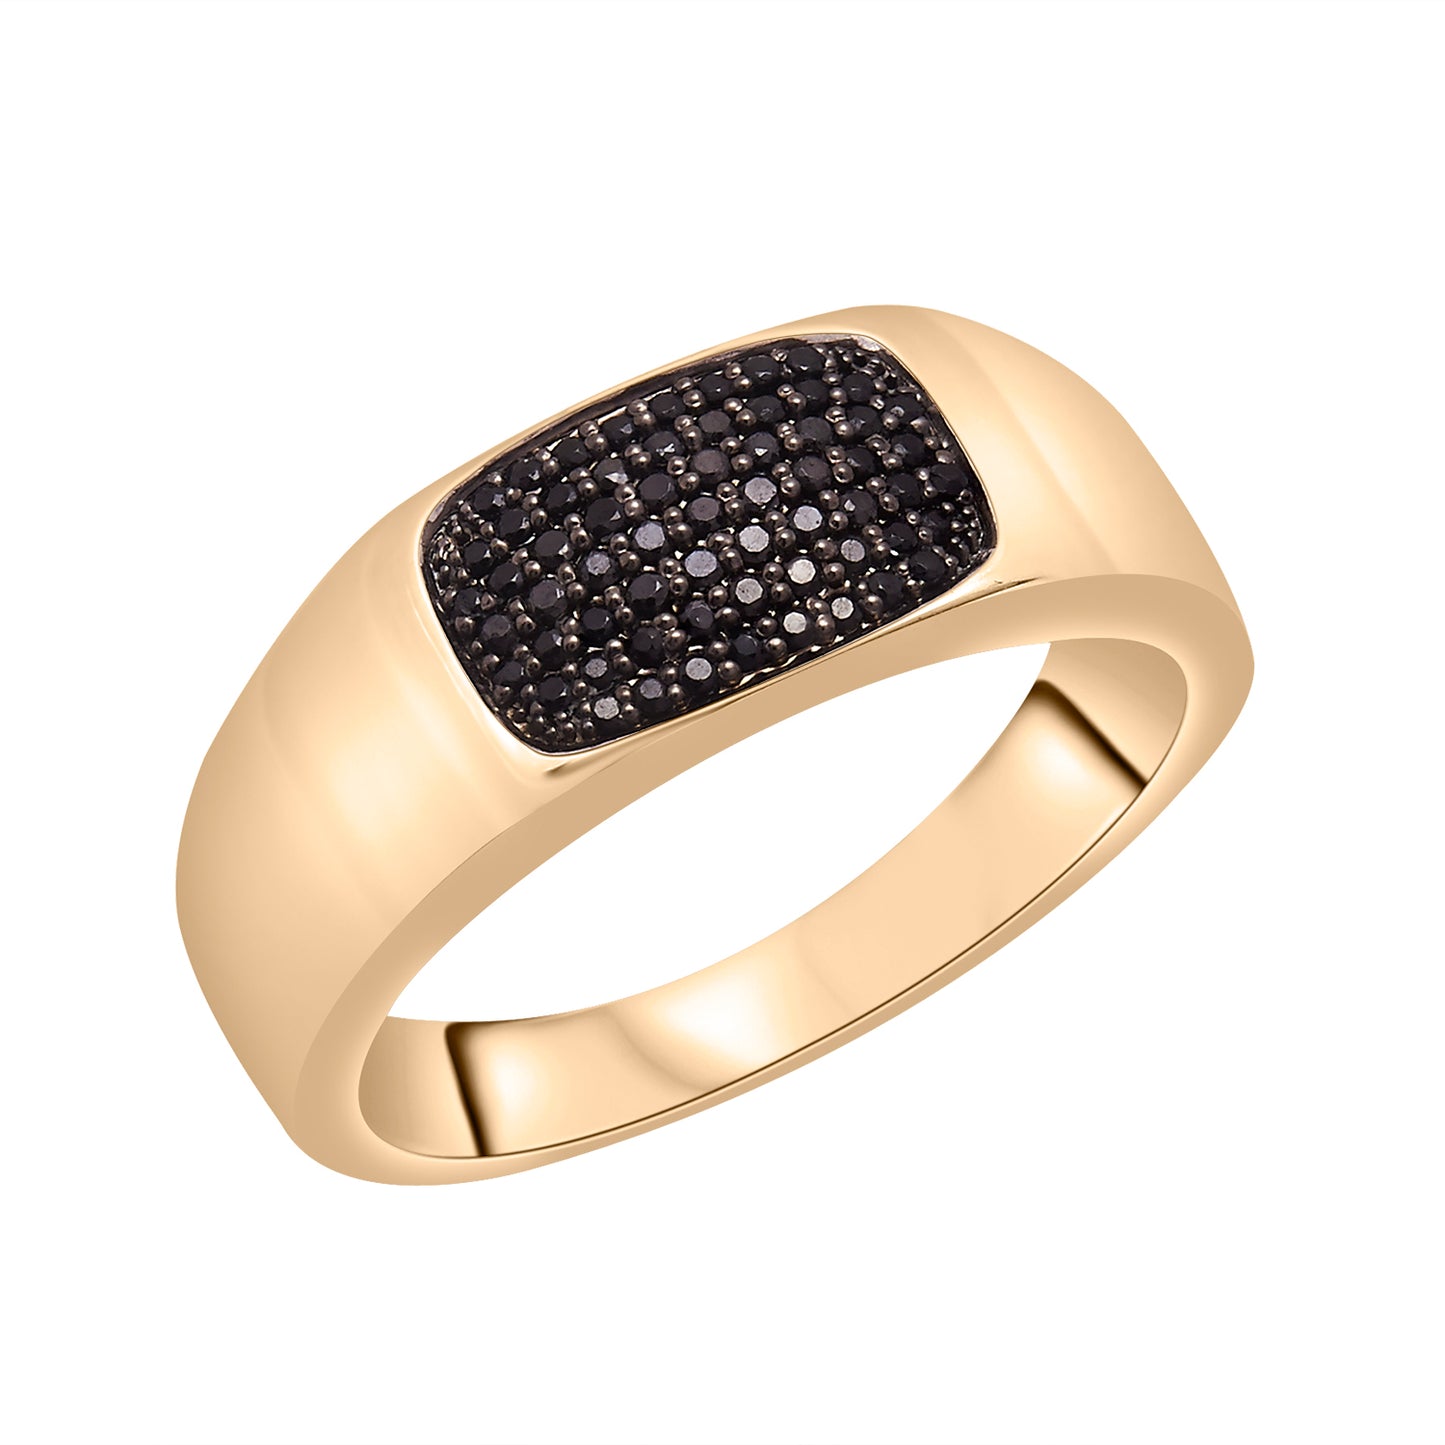 Black Diamond Ring coated with Gold